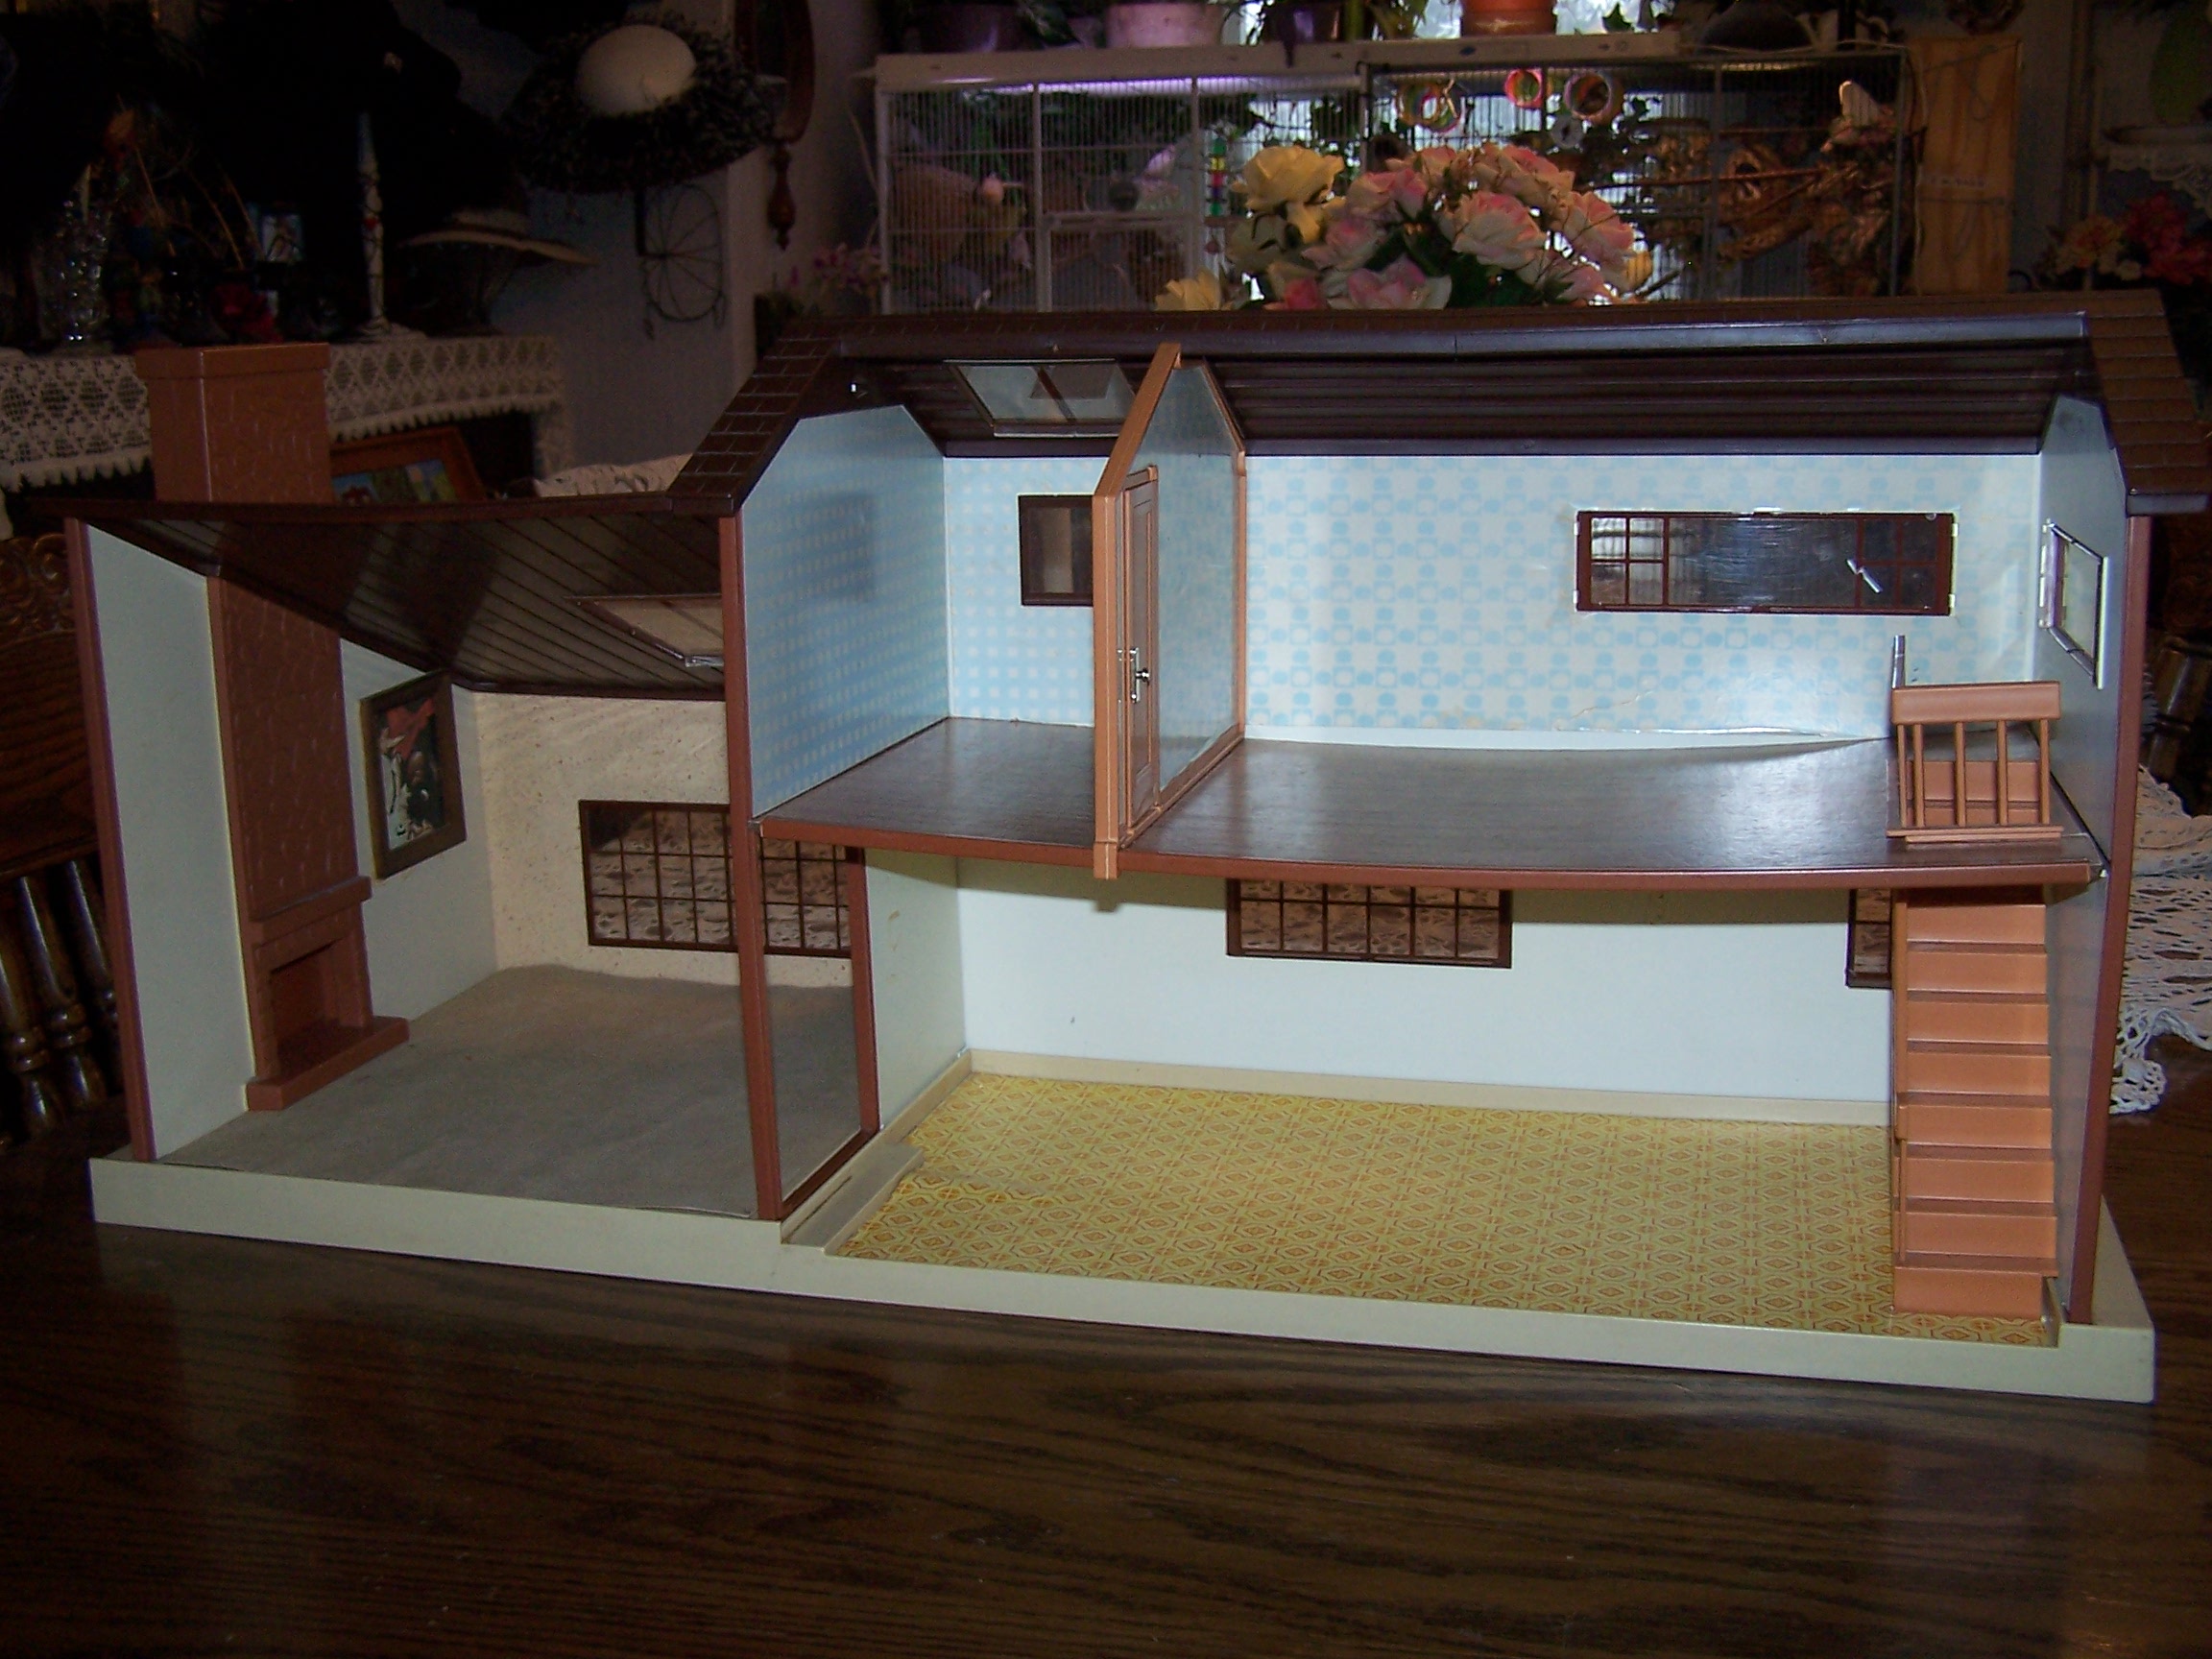 Image 52 of Dollhouse w Family, Furniture, Tomy